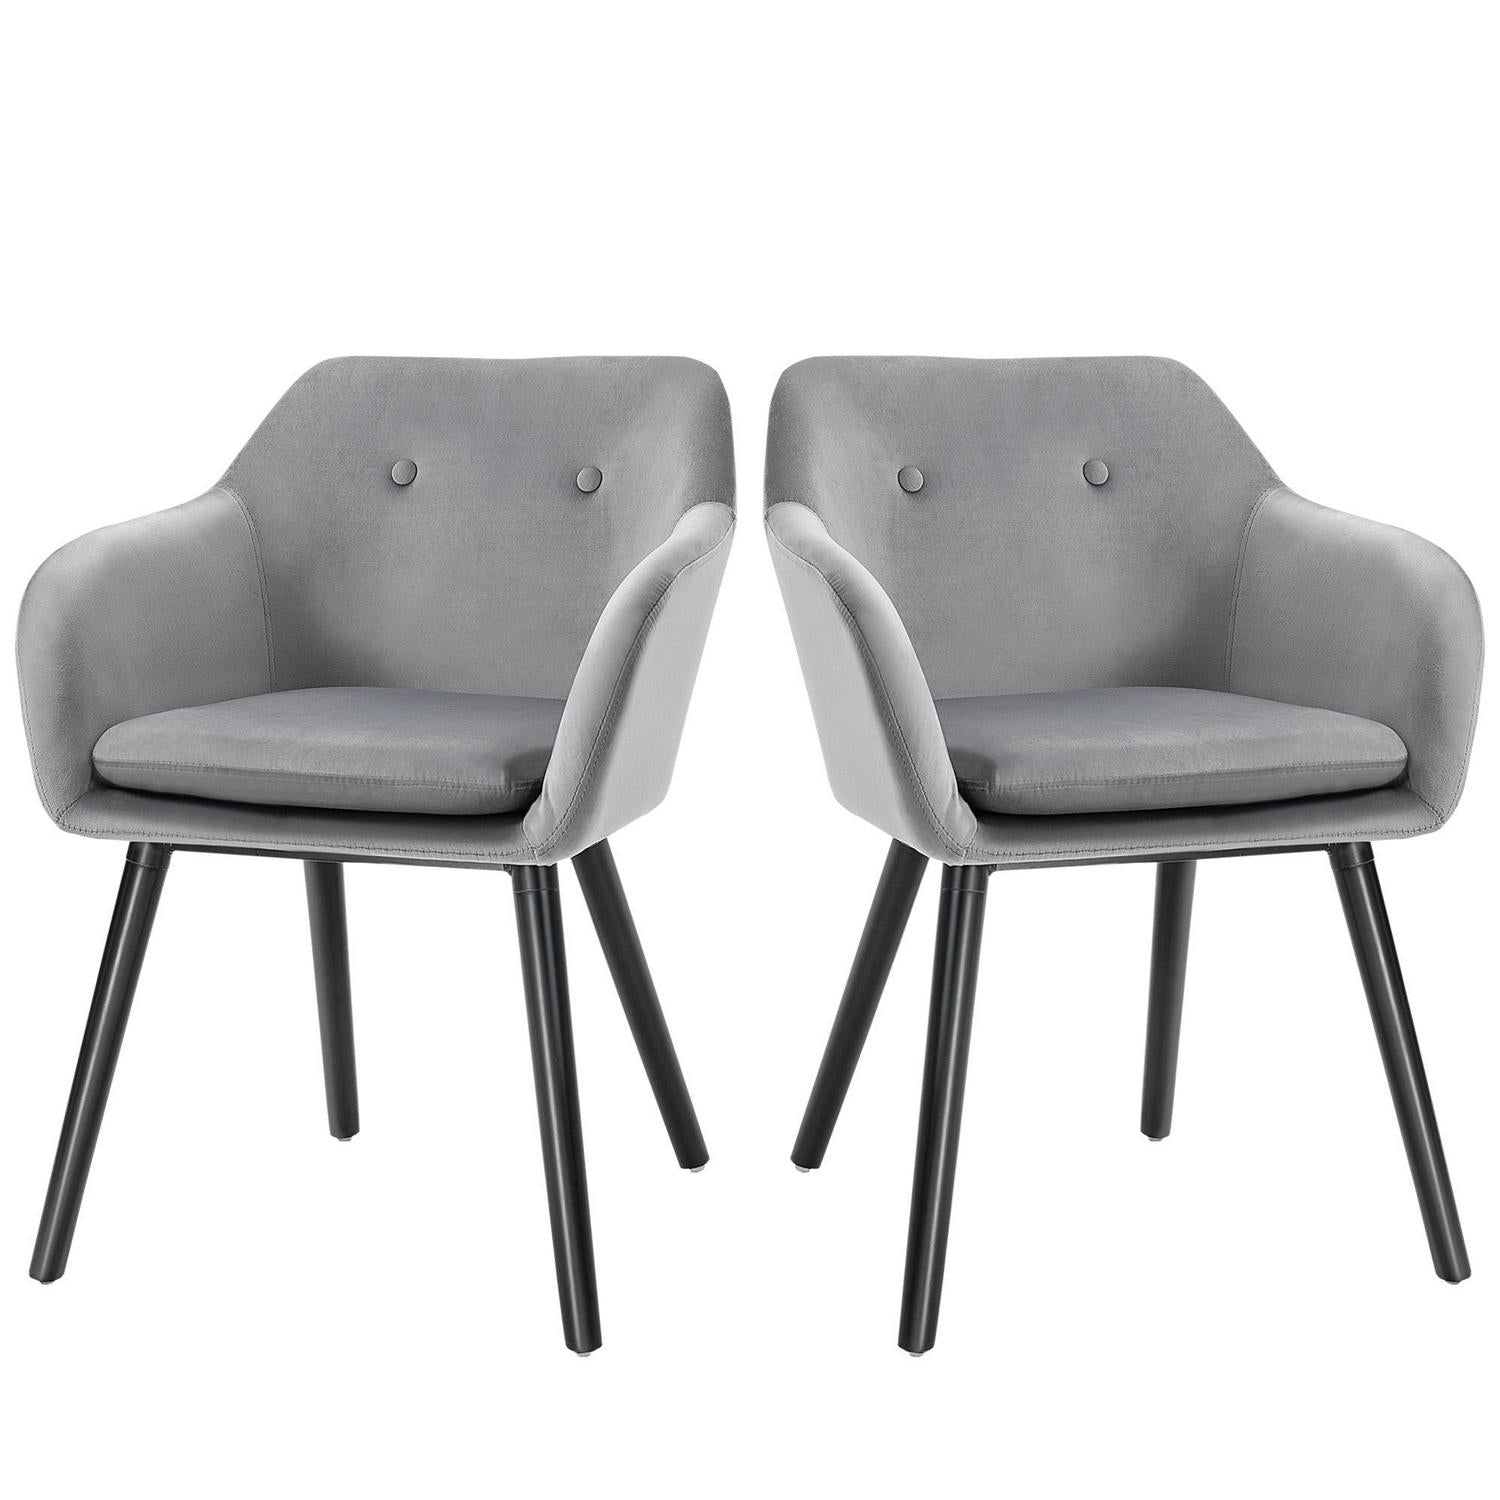 Set Of 2 Modern Dining Chairs, Upholstered Fabric Velvet-Touch Grey